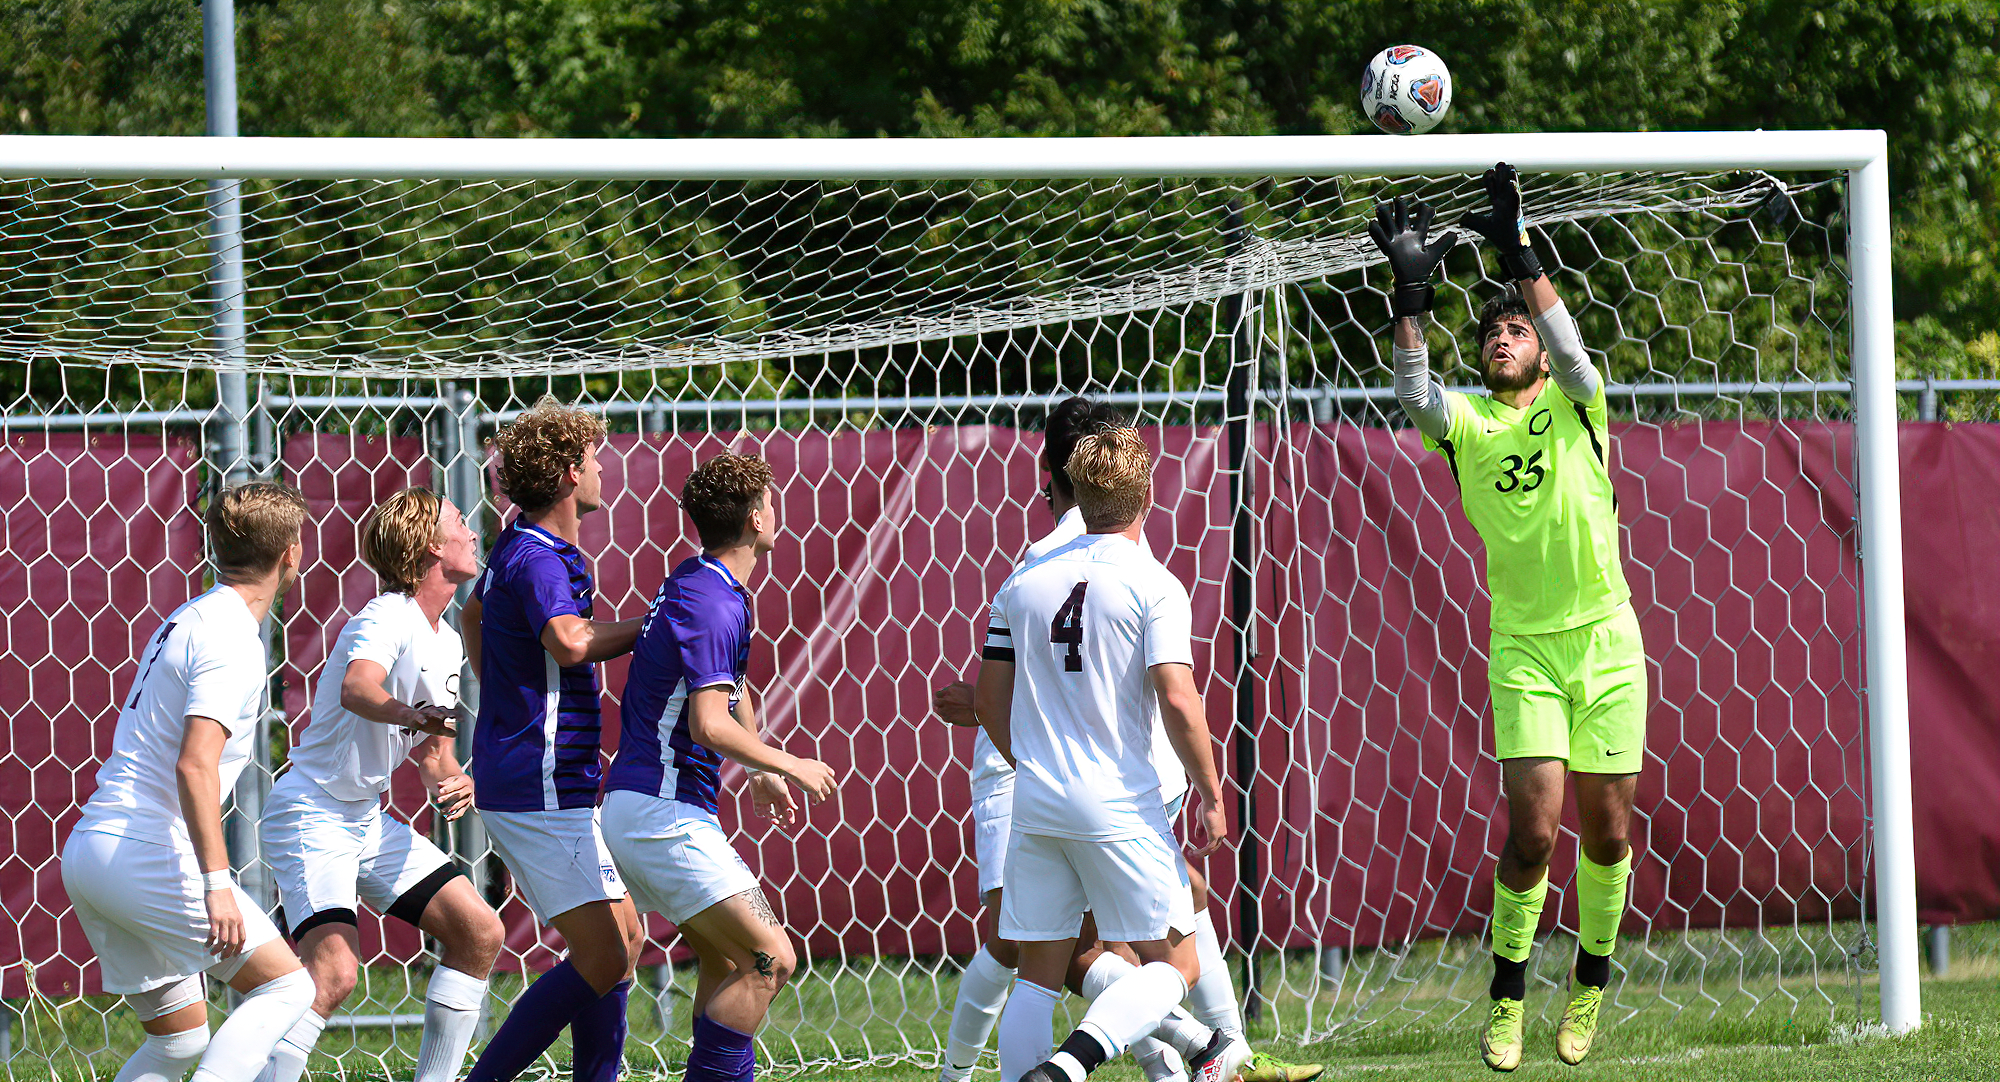 Cobber goalie Erick Torres goes up to grab a cross during the second half of Concordia's game with Loras.